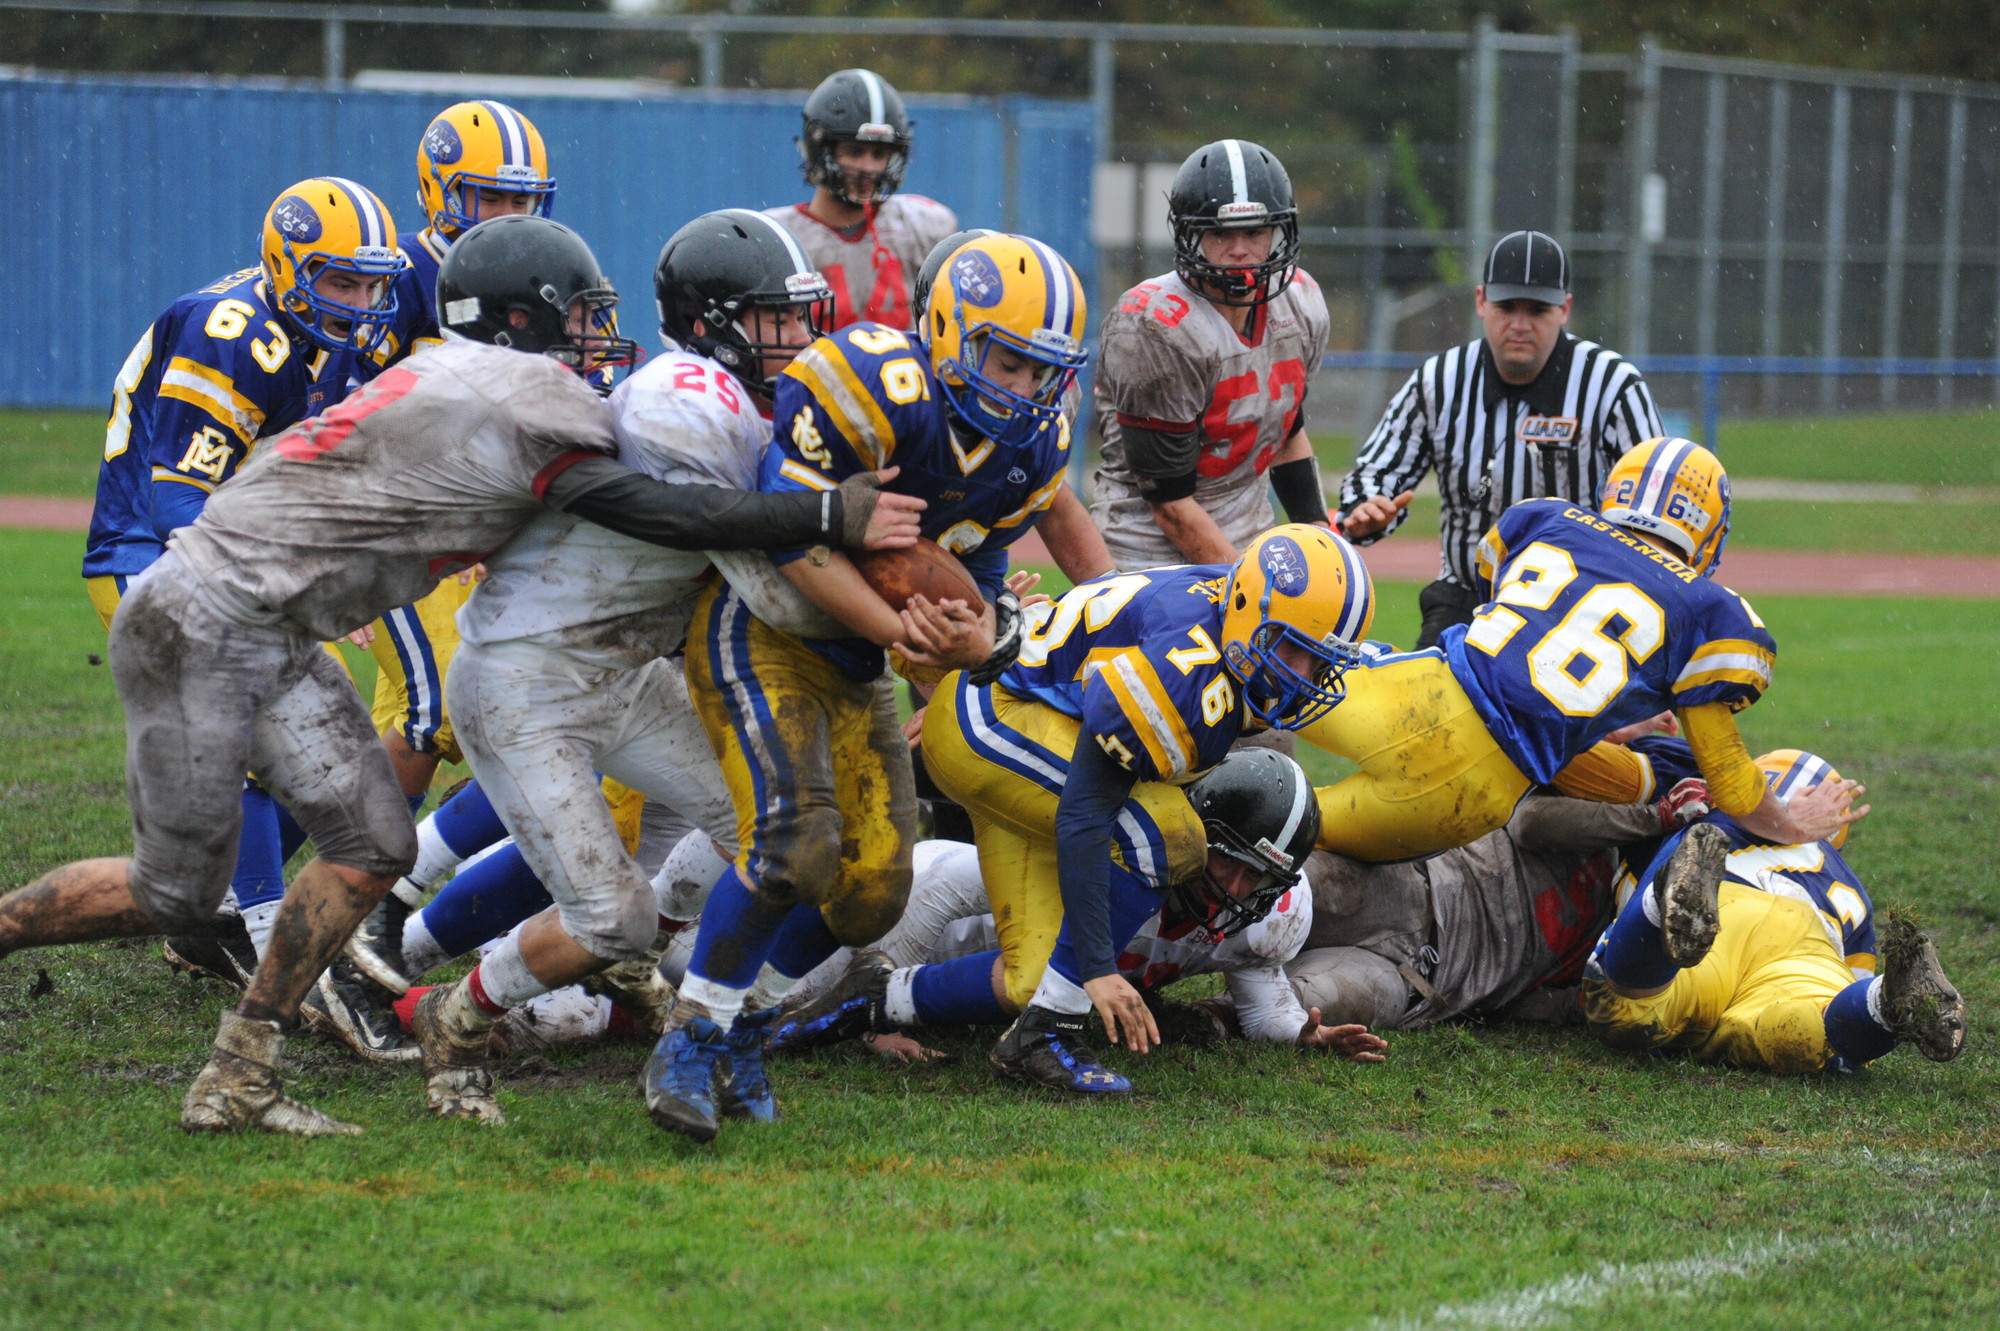 The Jets prevailed in the muddy conditions over Syosset, 44-0.